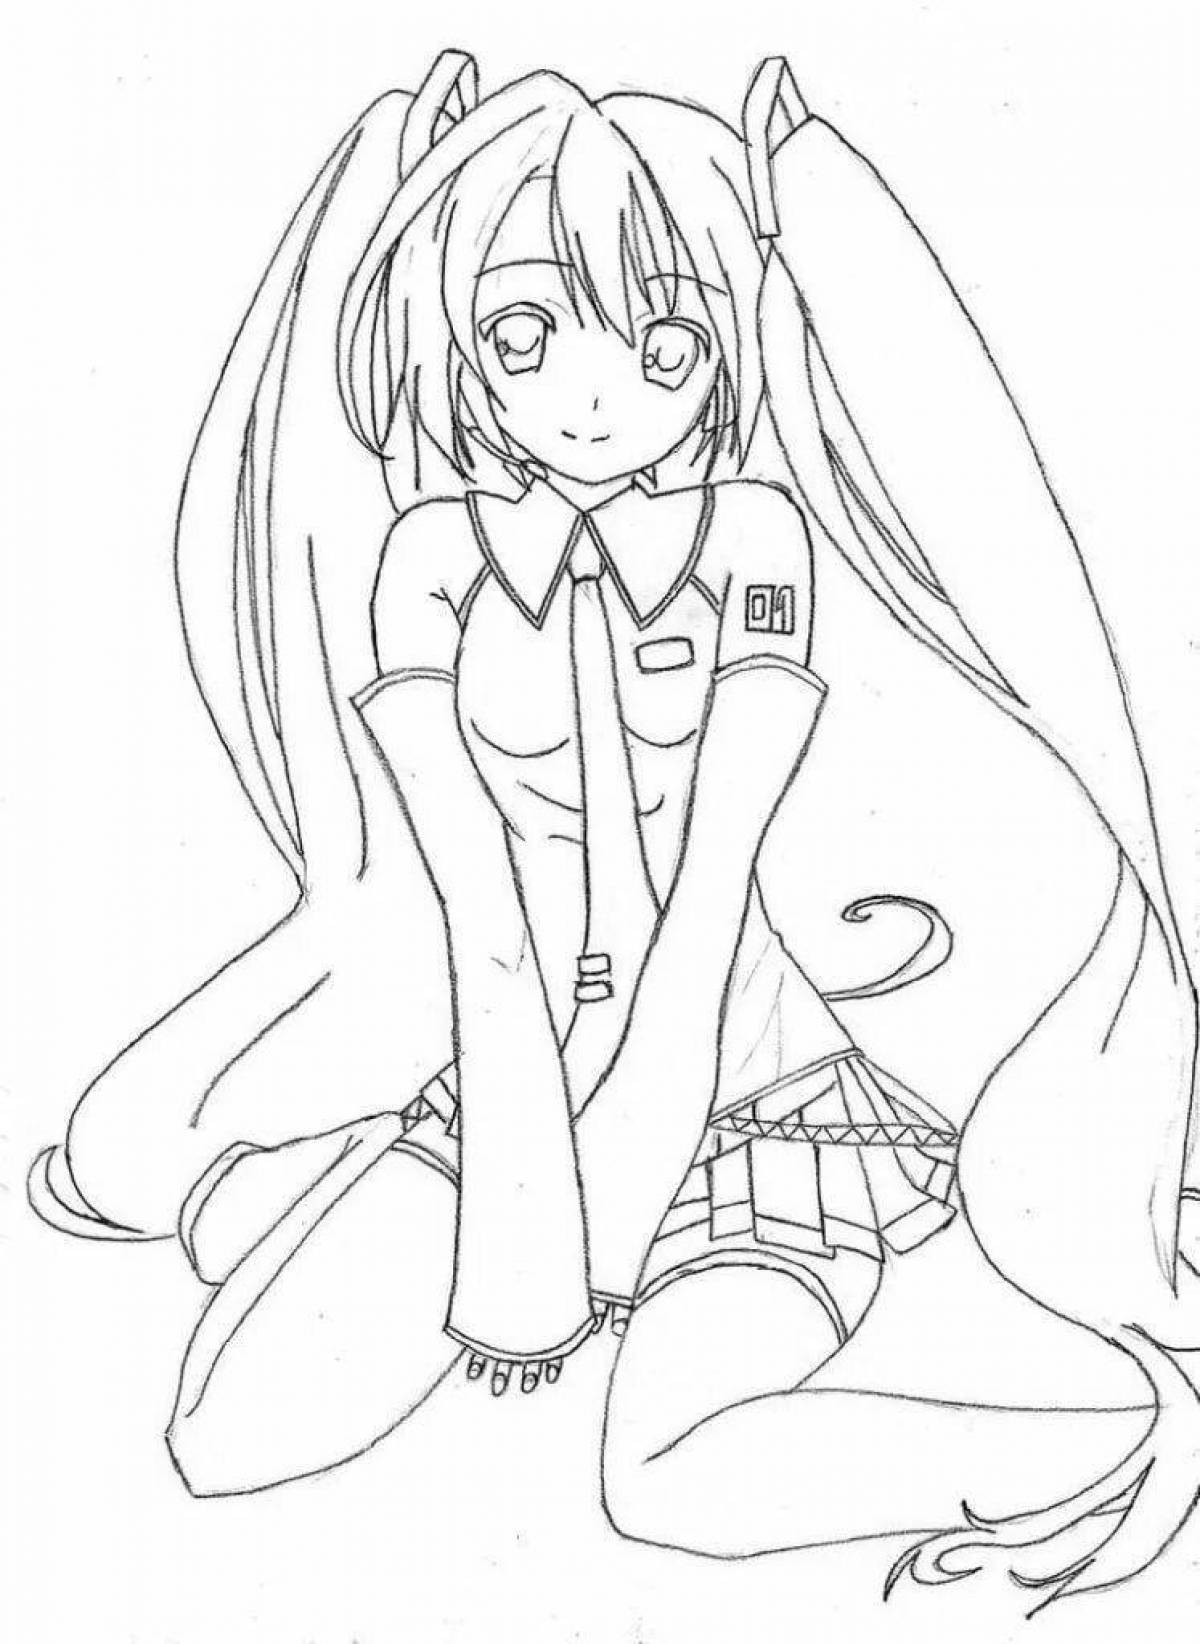 Lovely hatsune miku coloring page